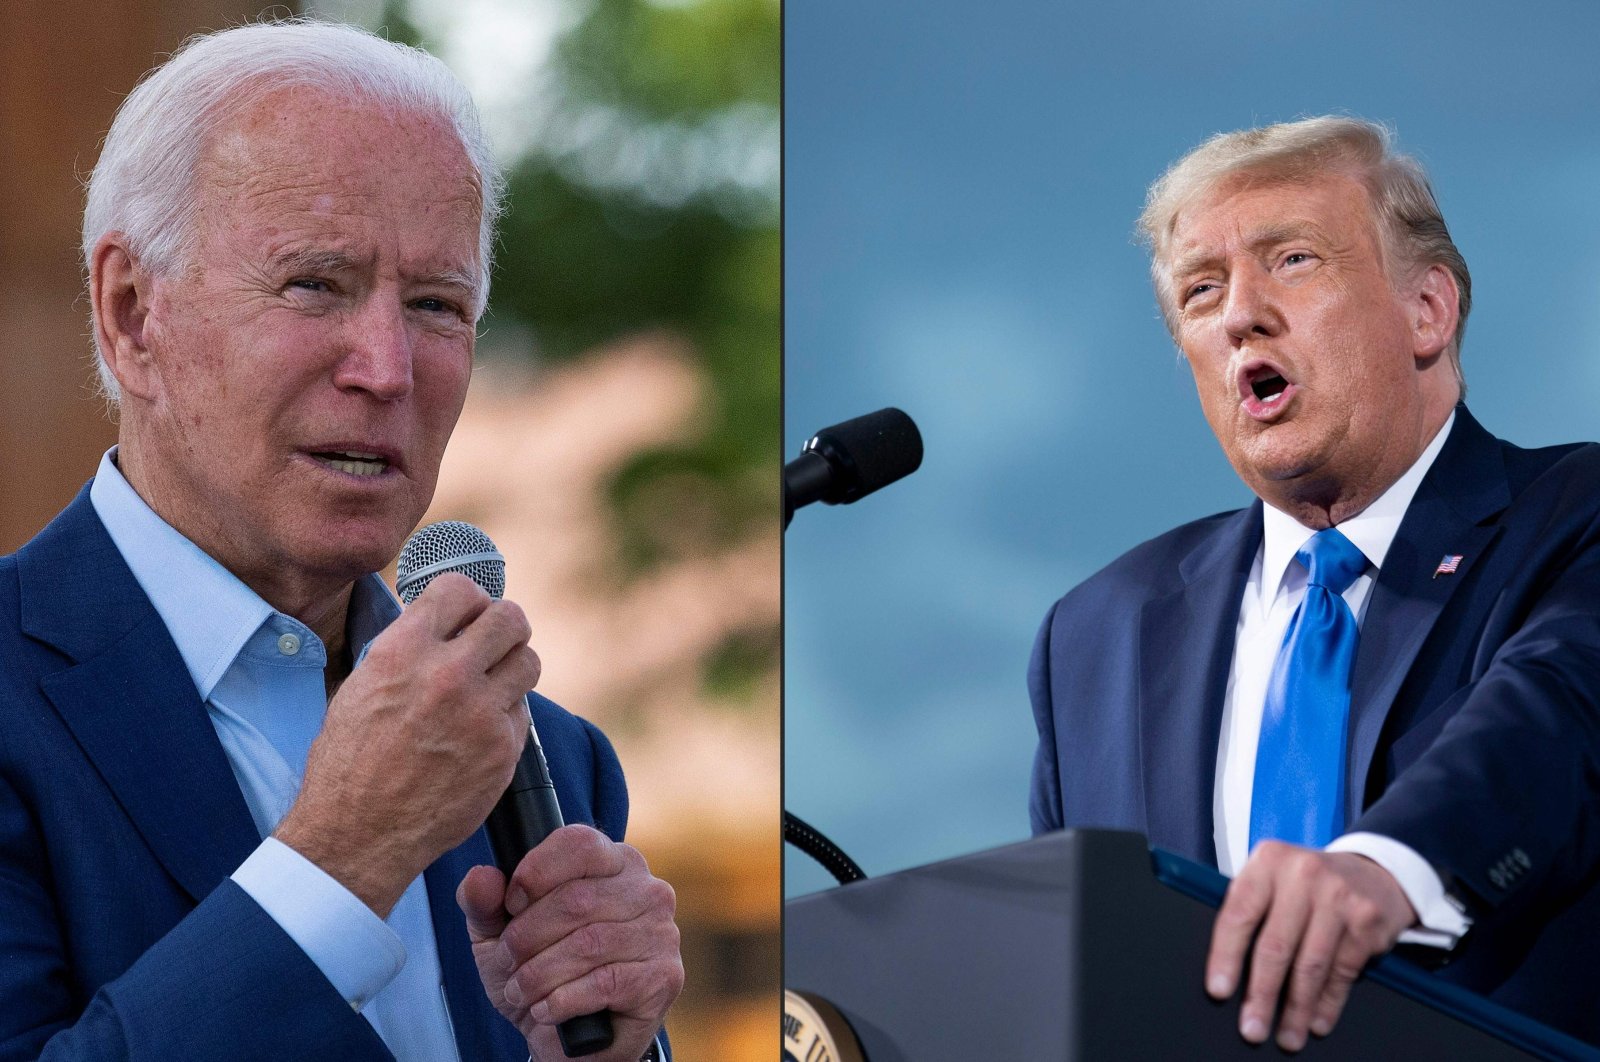 Democratic presidential candidate Joe Biden (L) speaks at the Black Economic Summit at Camp North End in Charlotte, North Carolina, Sept. 23, 2020. U.S. while President Donald Trump (R) speaks during a campaign rally at Cecil Airport in Jacksonville, Florida, Sept. 24, 2020. (AFP Photo)